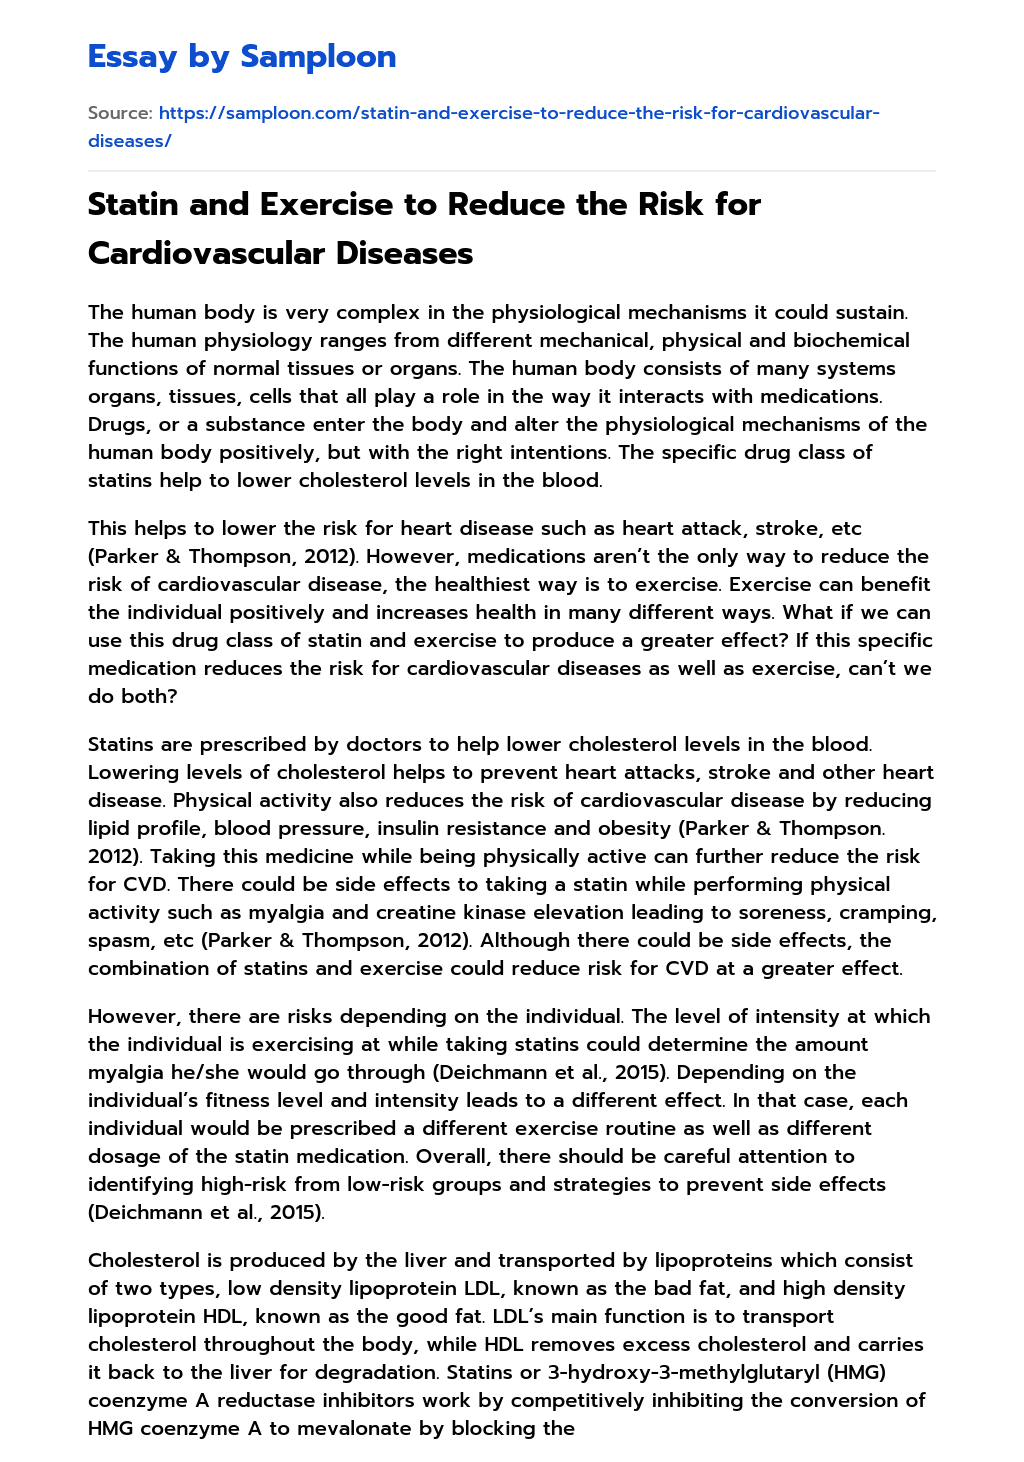 Statin and Exercise to Reduce the Risk for Cardiovascular Diseases essay